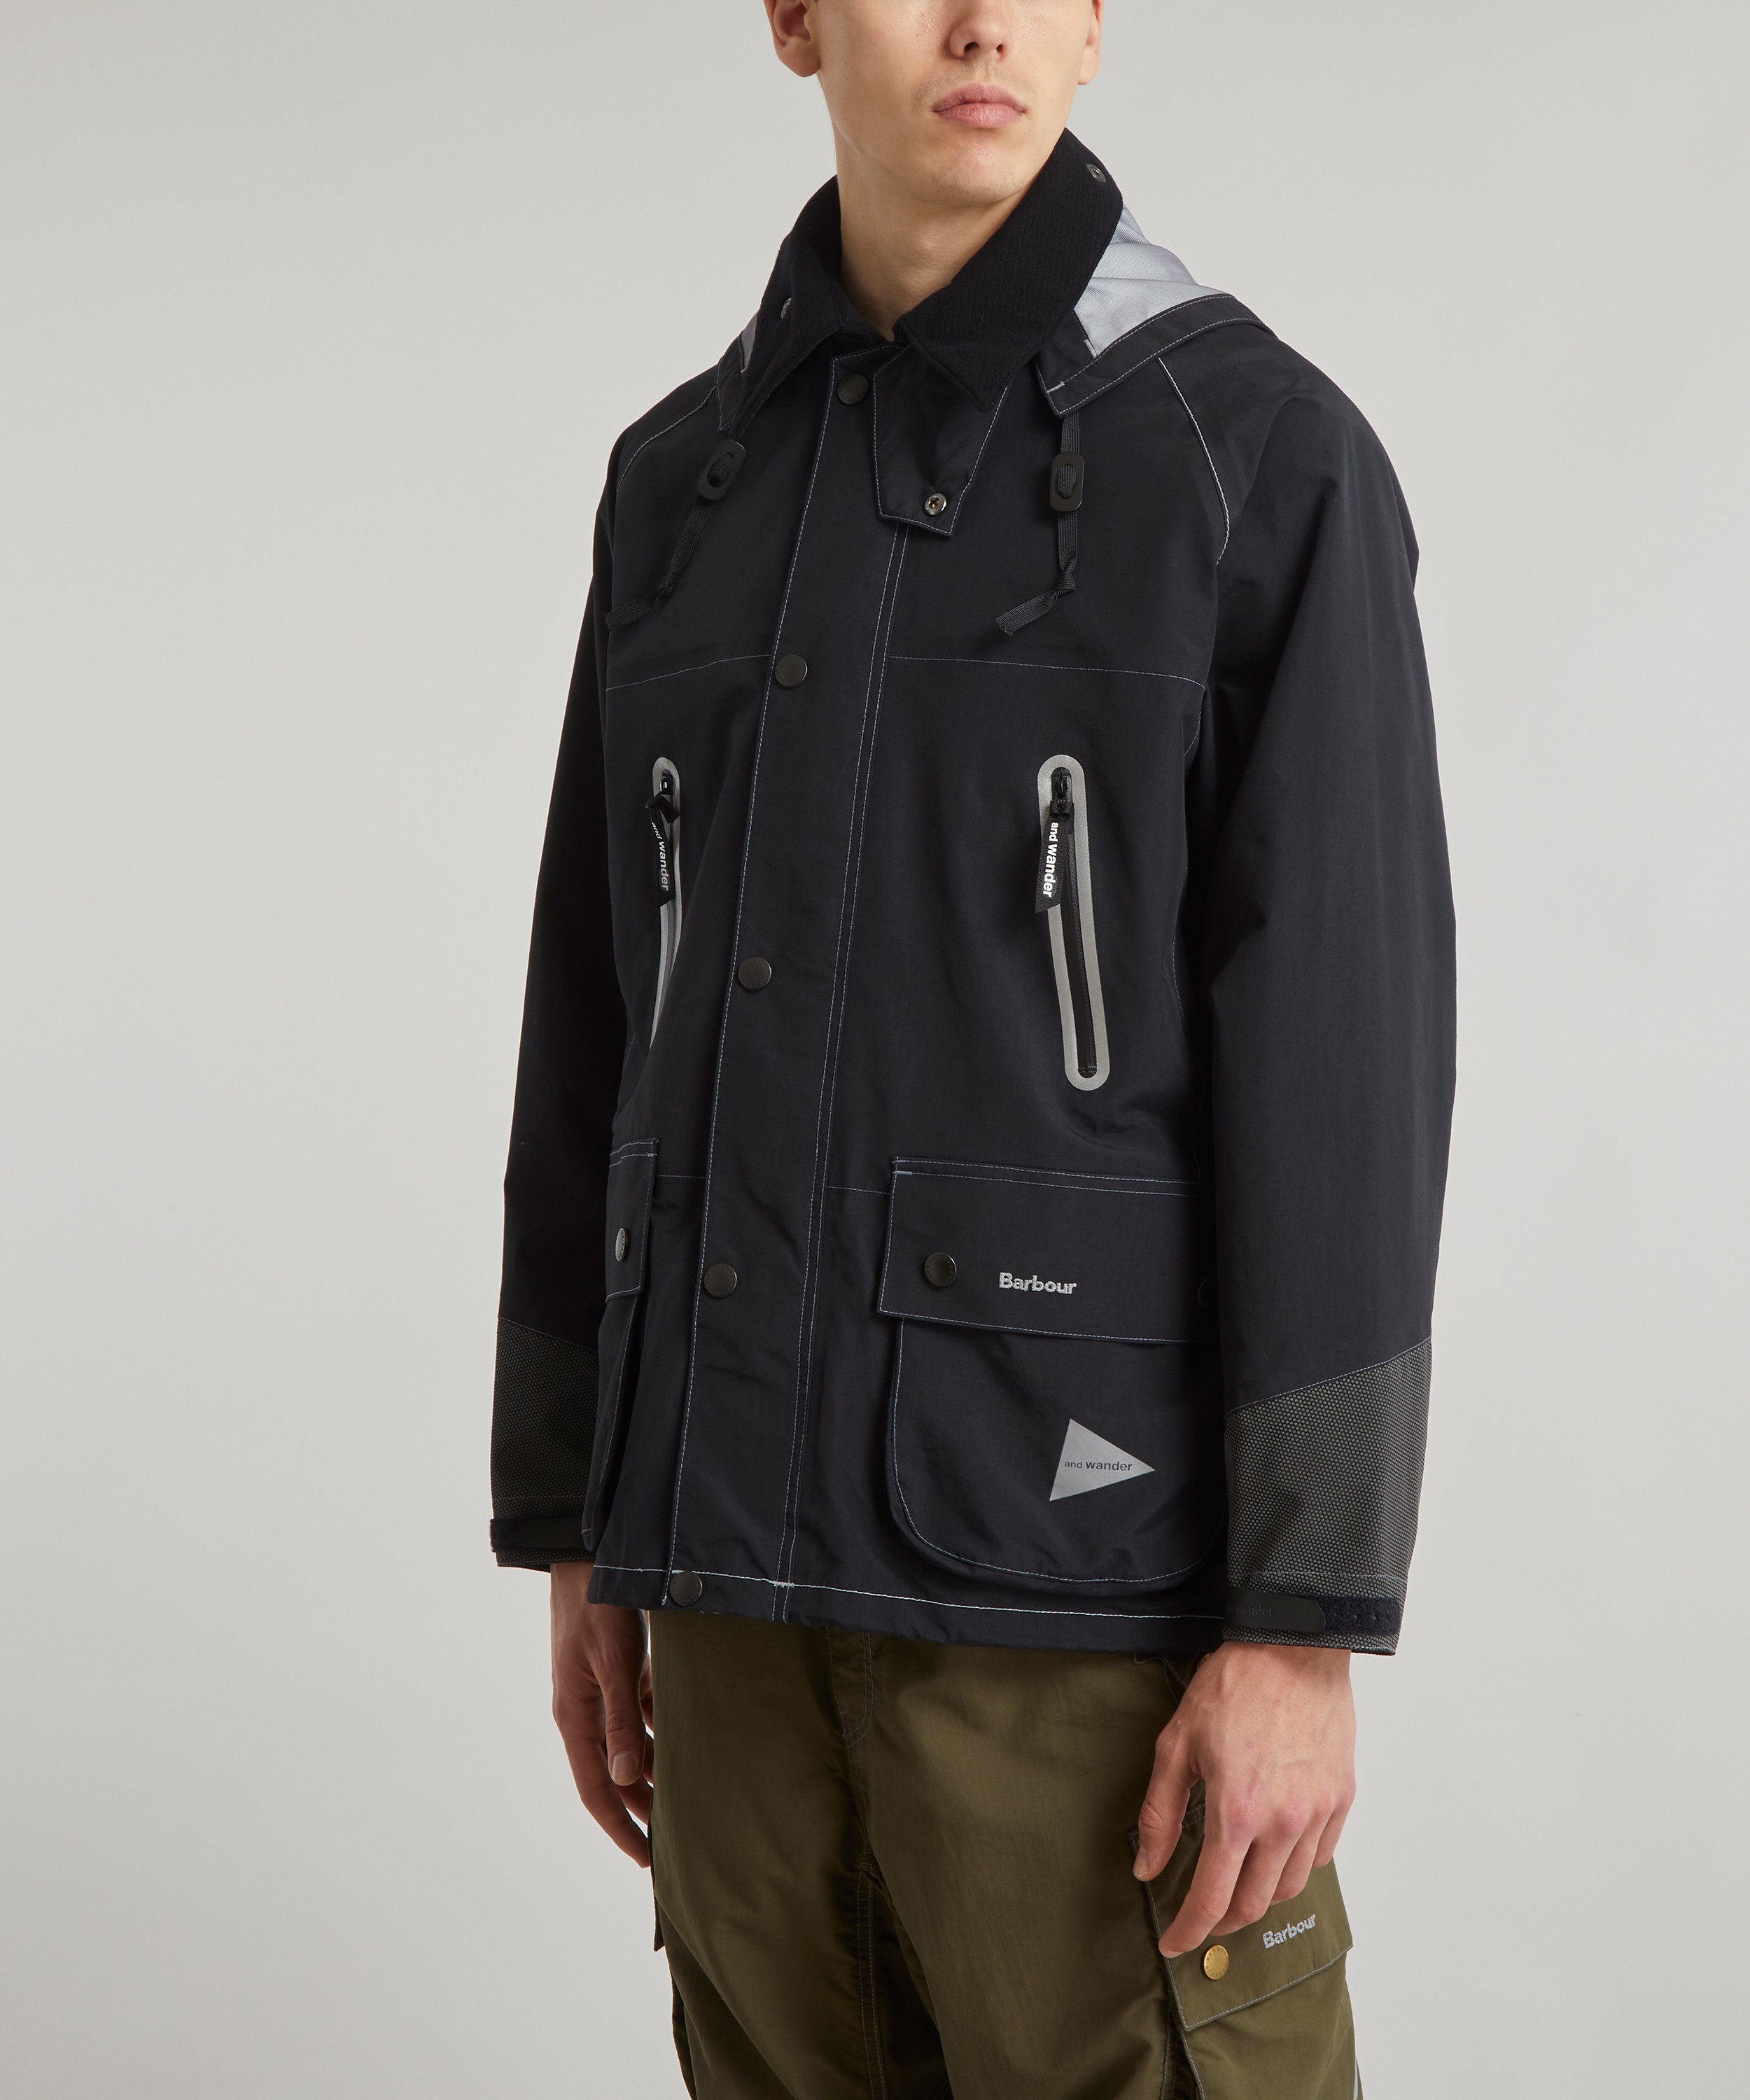 Barbour x and Wander 3L Waterproof Jacket | Liberty